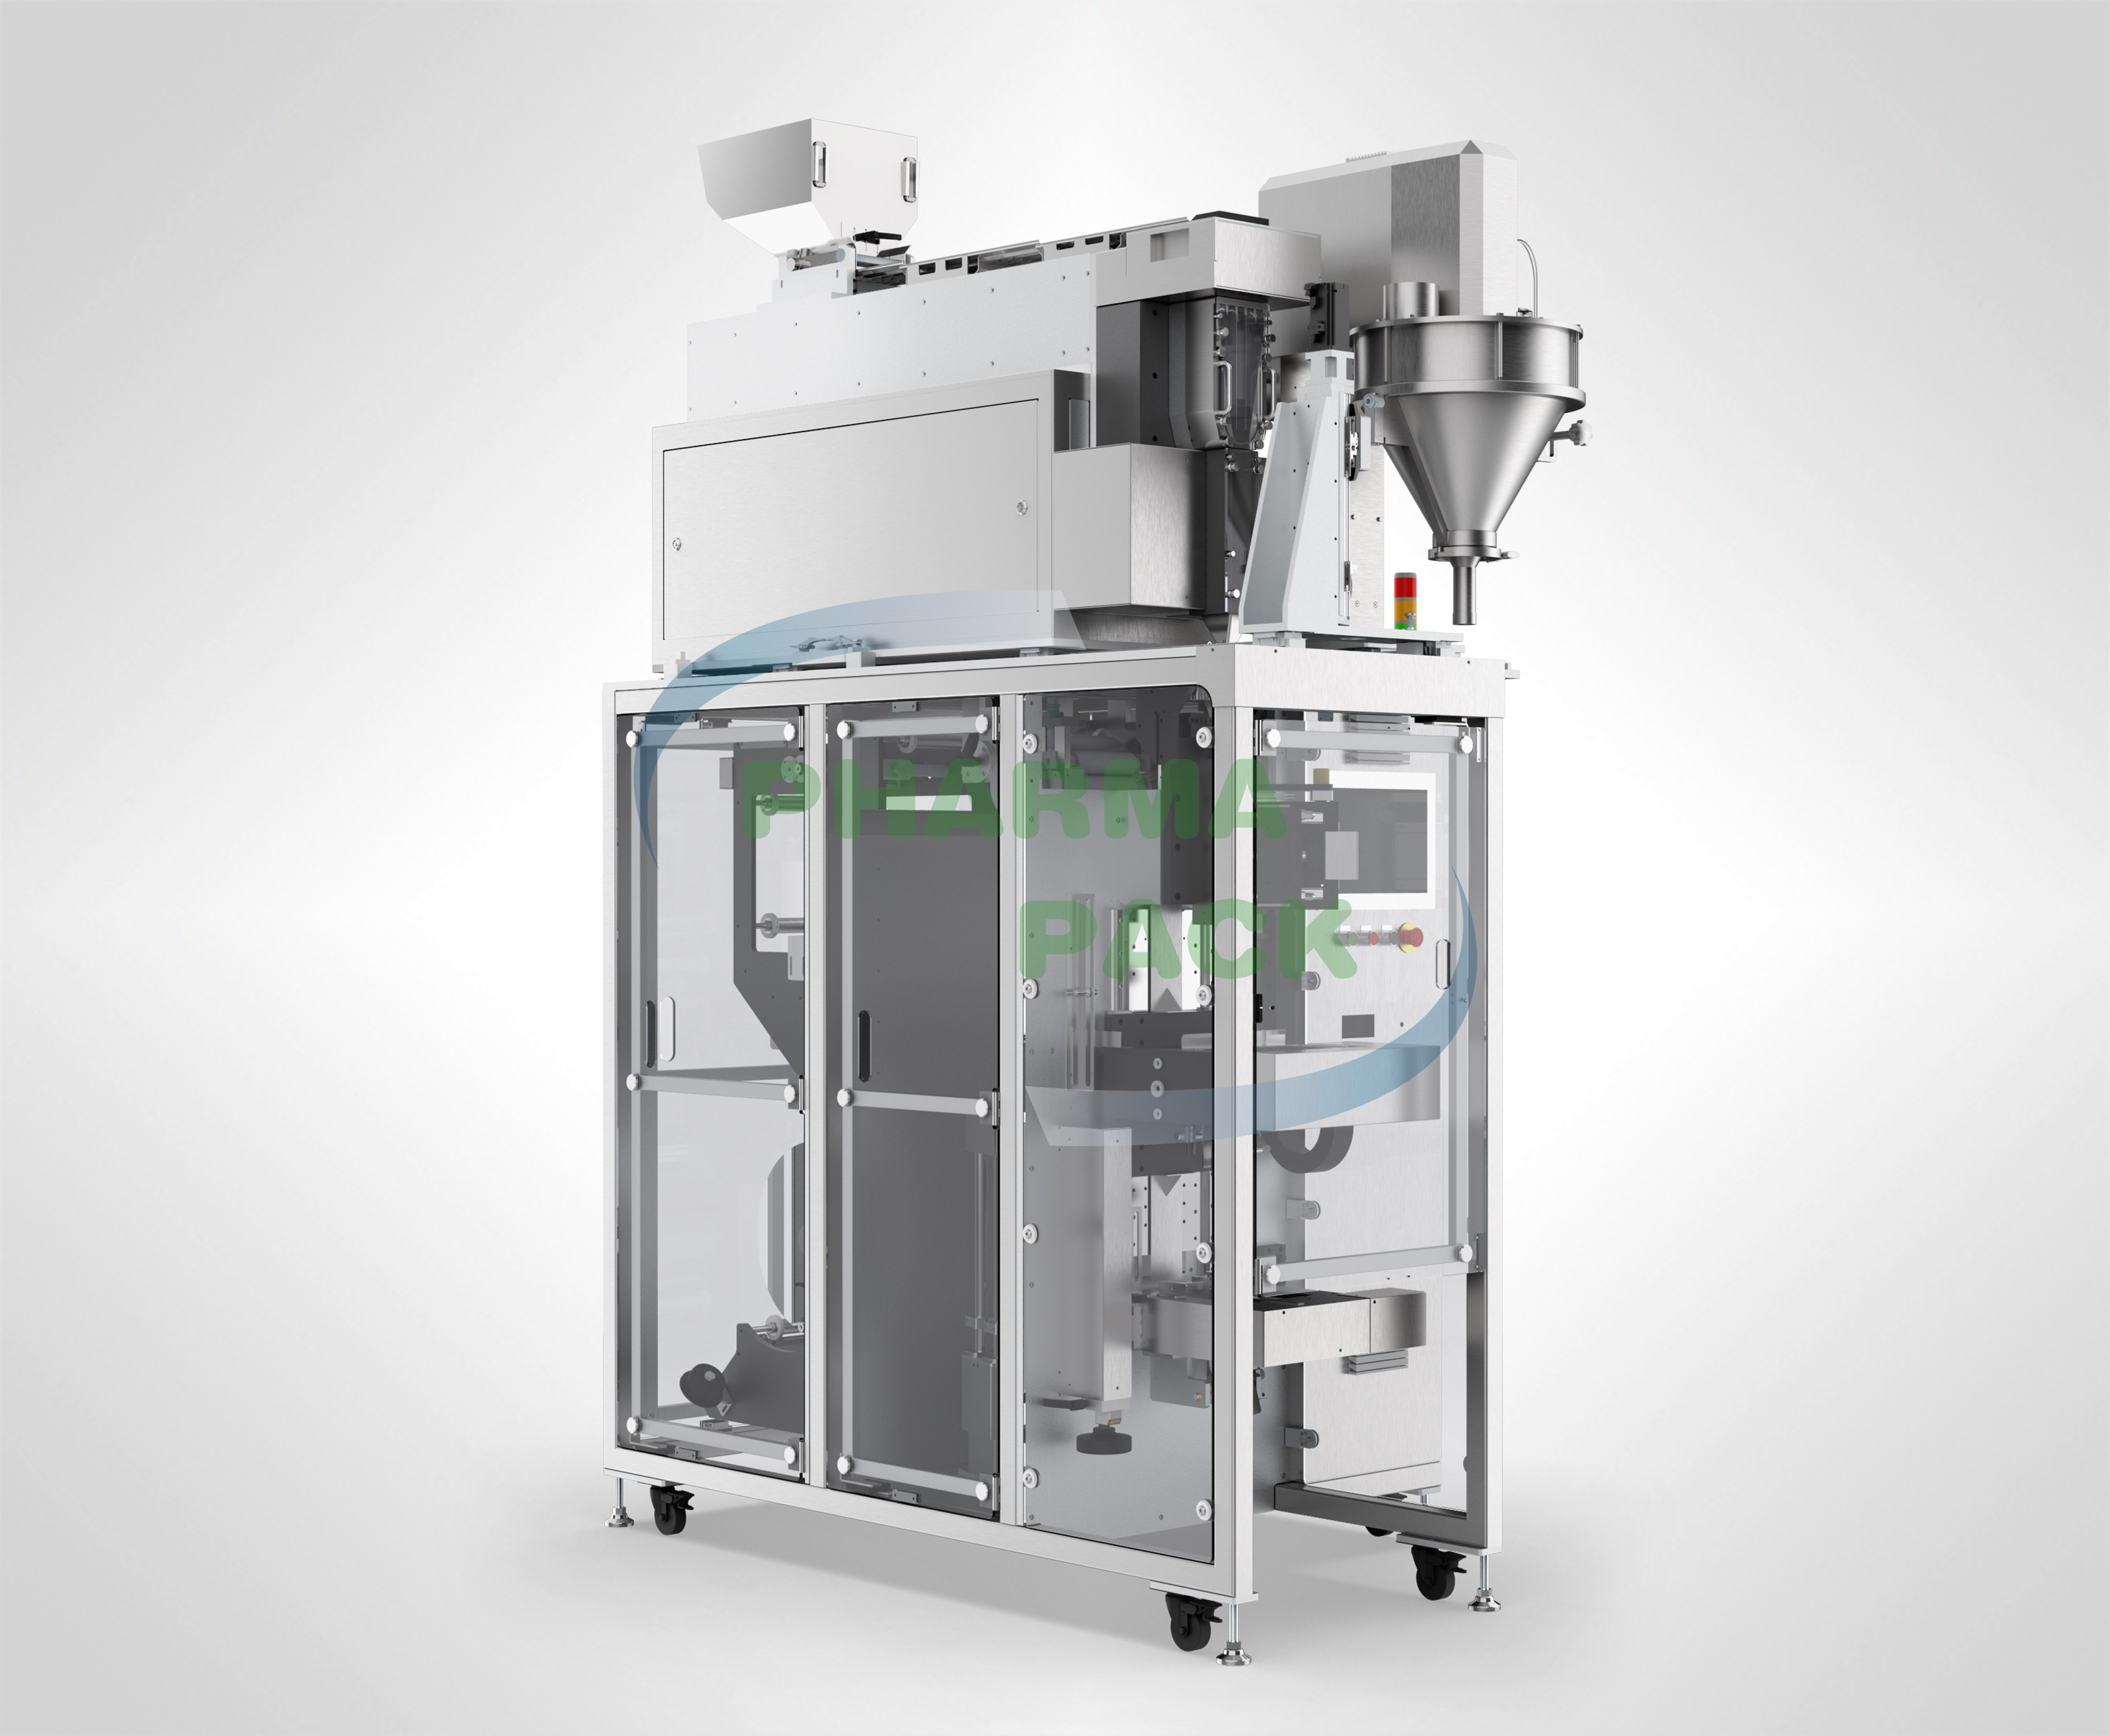 Introducing Pharmapack LFVS-01S 3 in 1 Stick Packing Machine: Revolutionizing Automatic Packaging